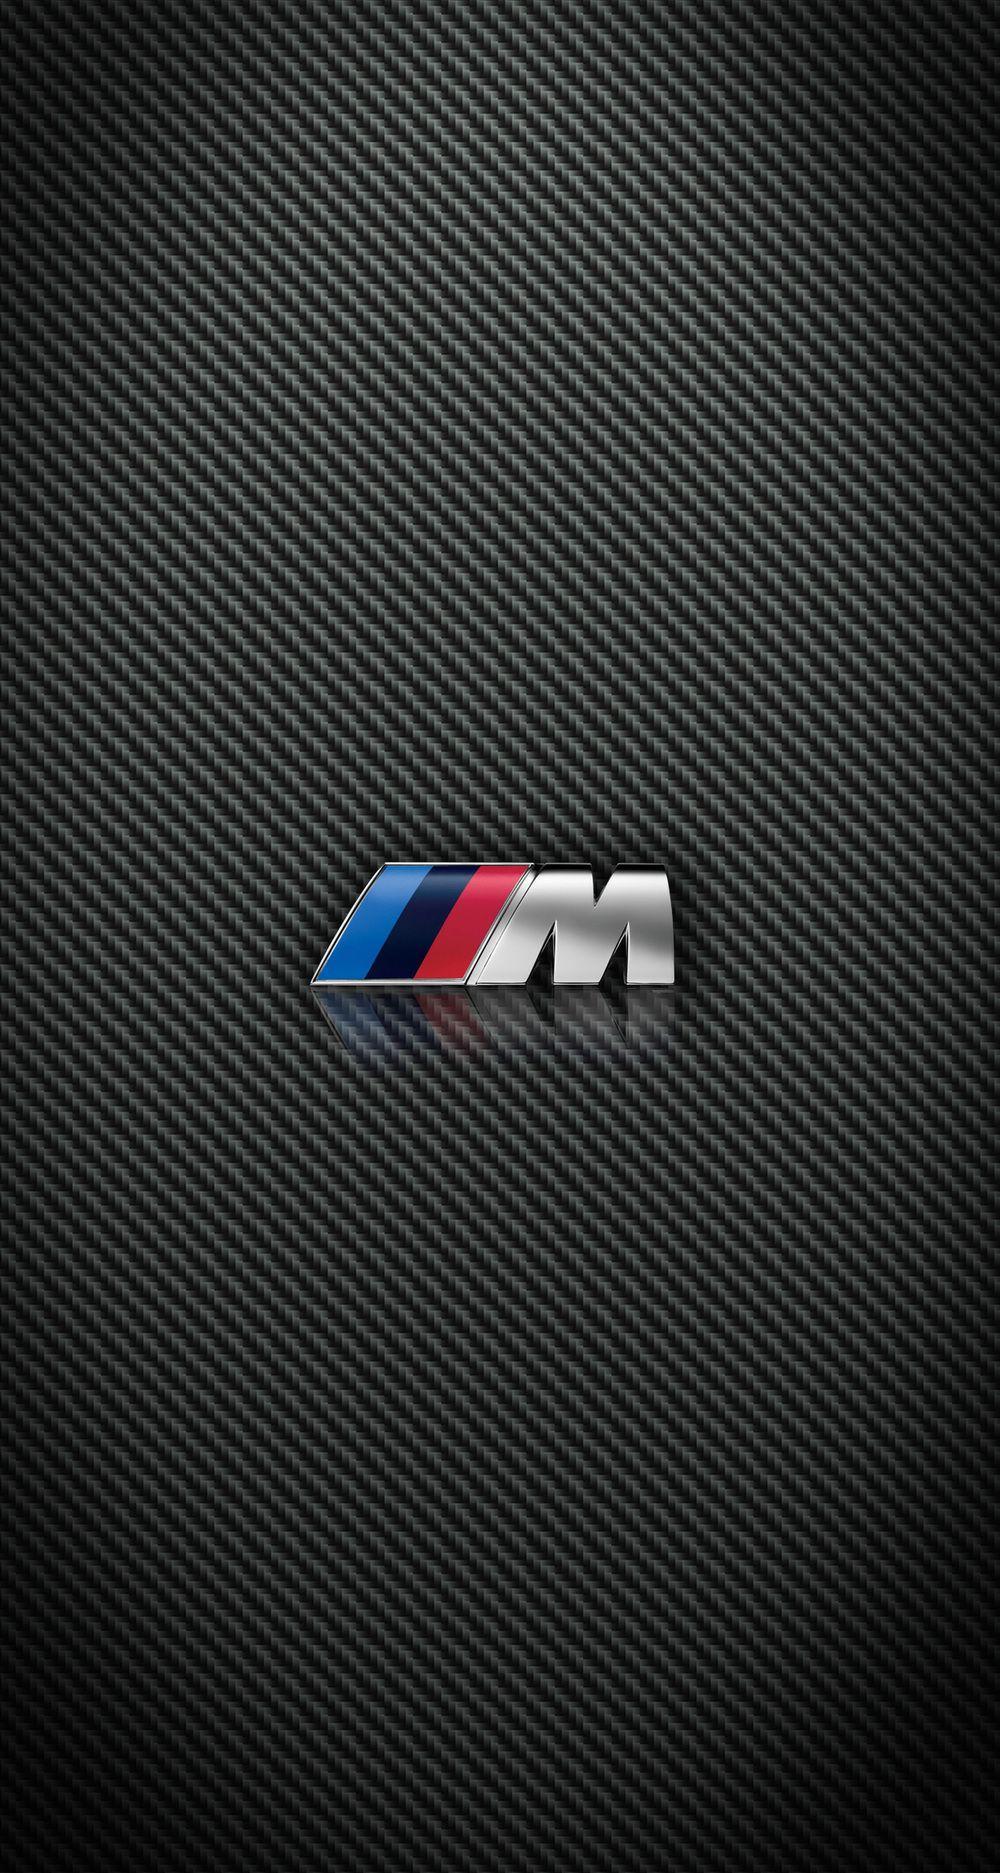 Carbon Fiber BMW and M Power iPhone wallpaper for iPhone 6 Plus